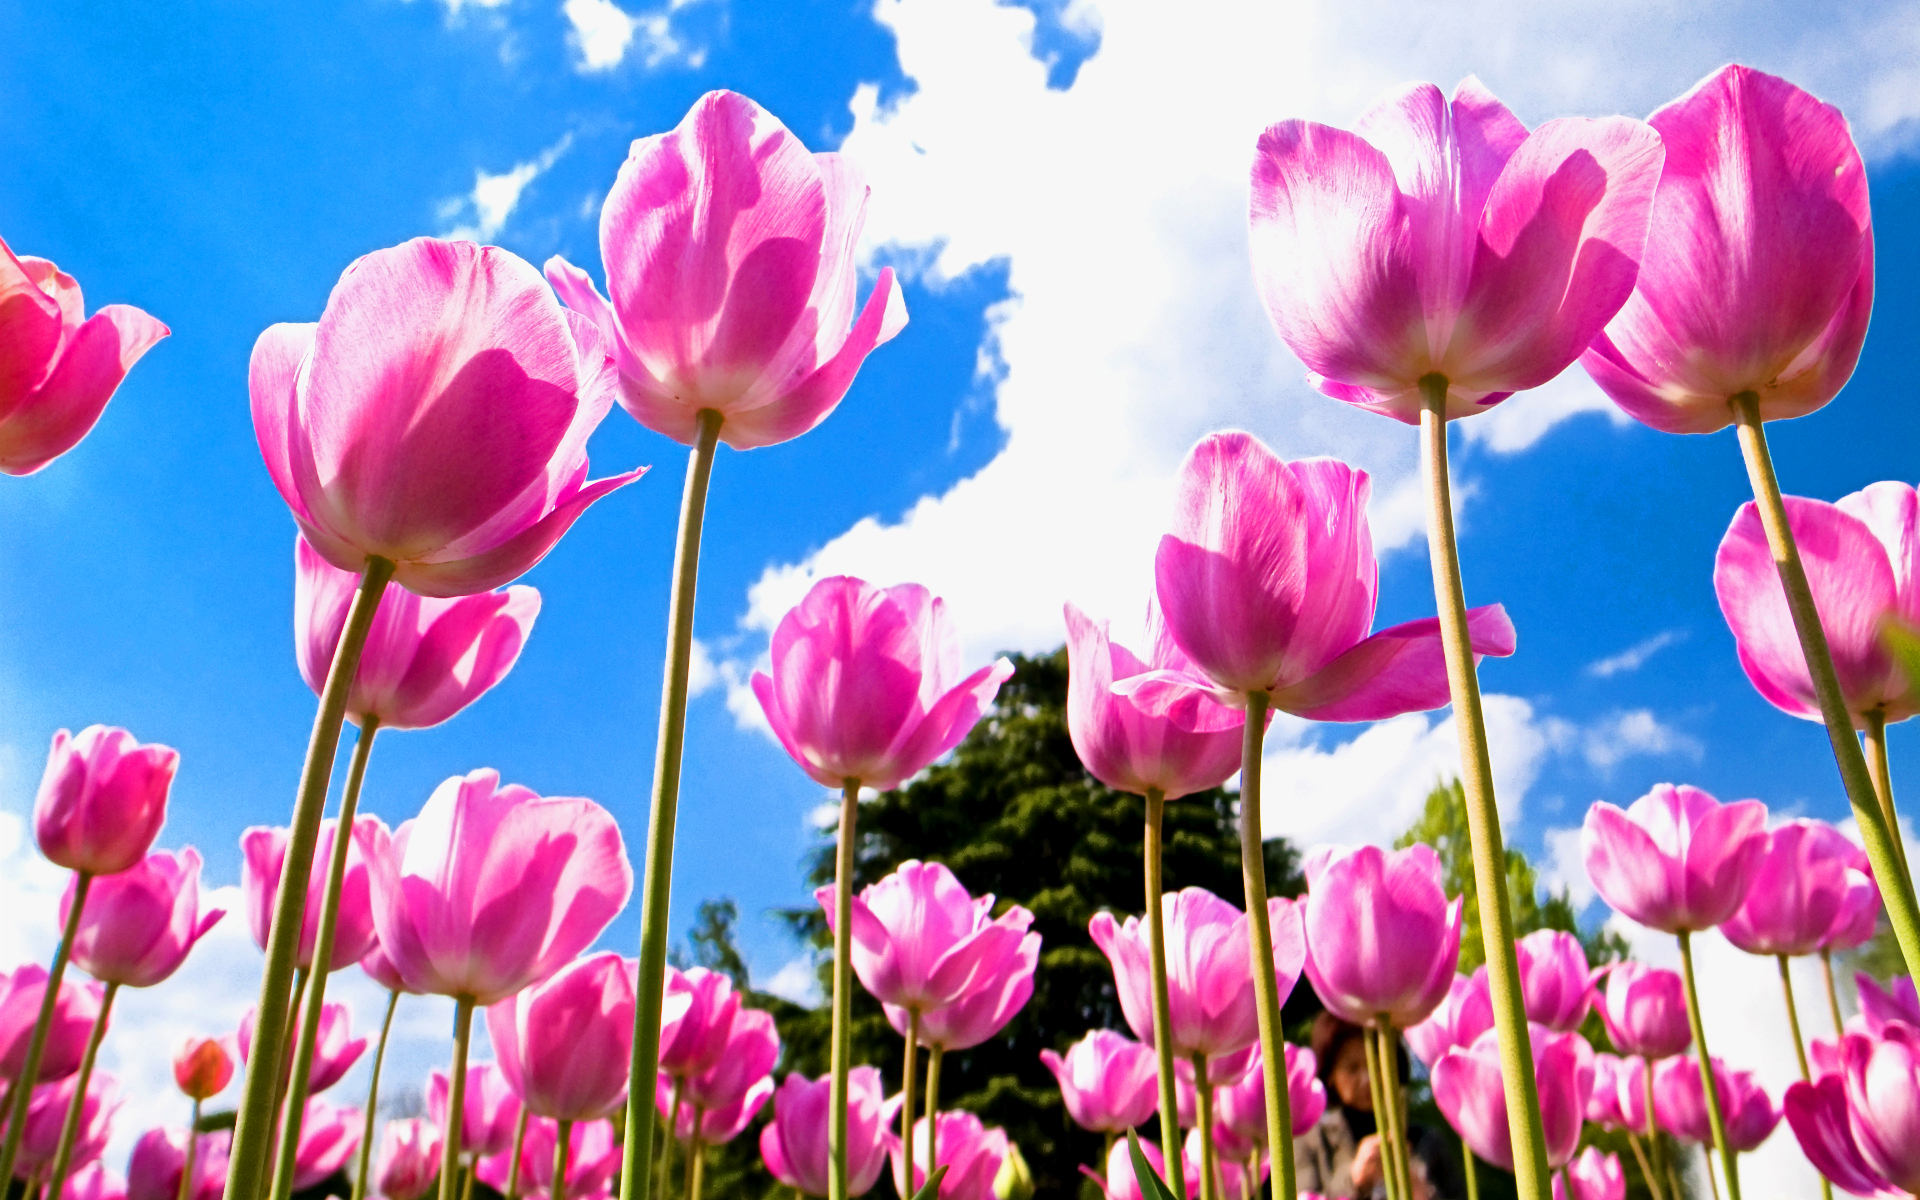 Spring Background free download | Wallpapers, Backgrounds, Images ...